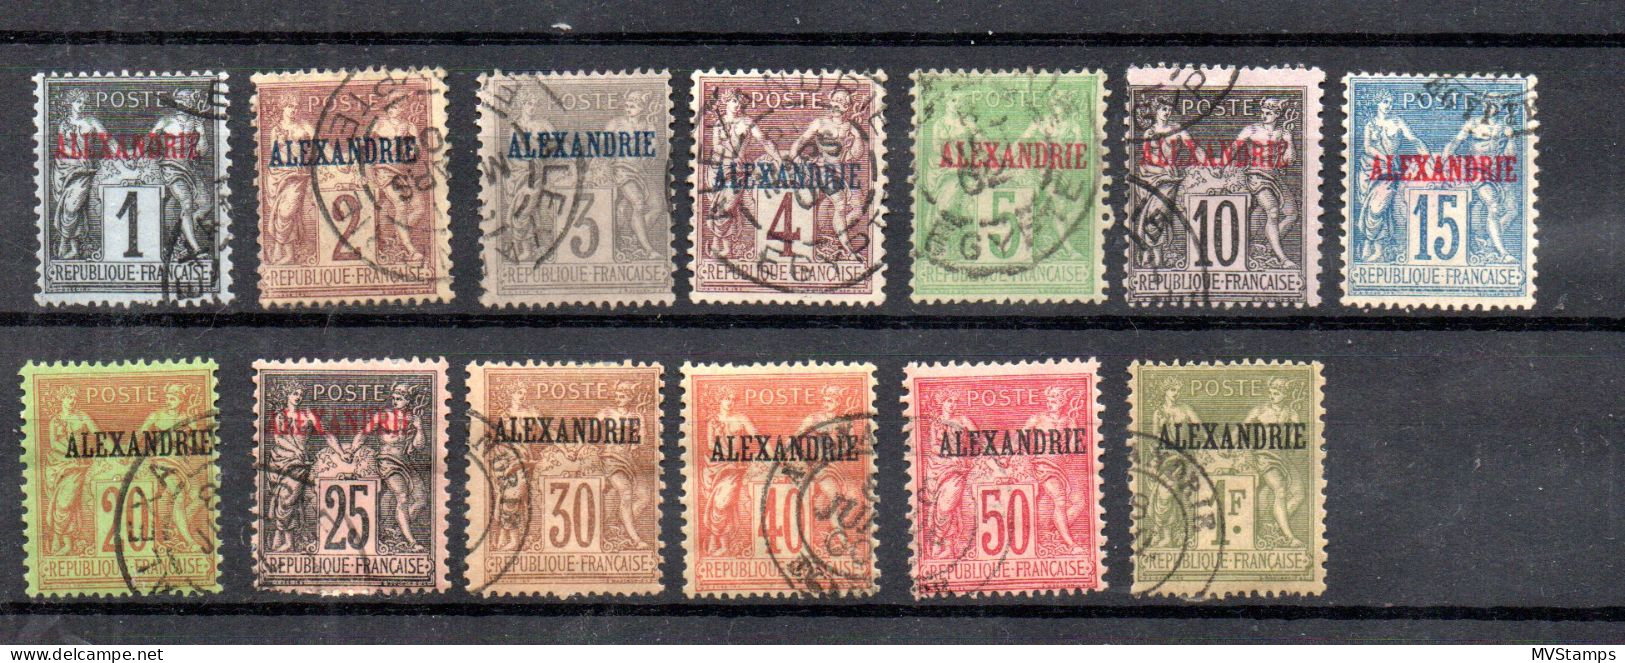 France Post In Alexandria 1899/1900 Old Definitive Sage Stamps (Michel 1/13) Used - Gebraucht